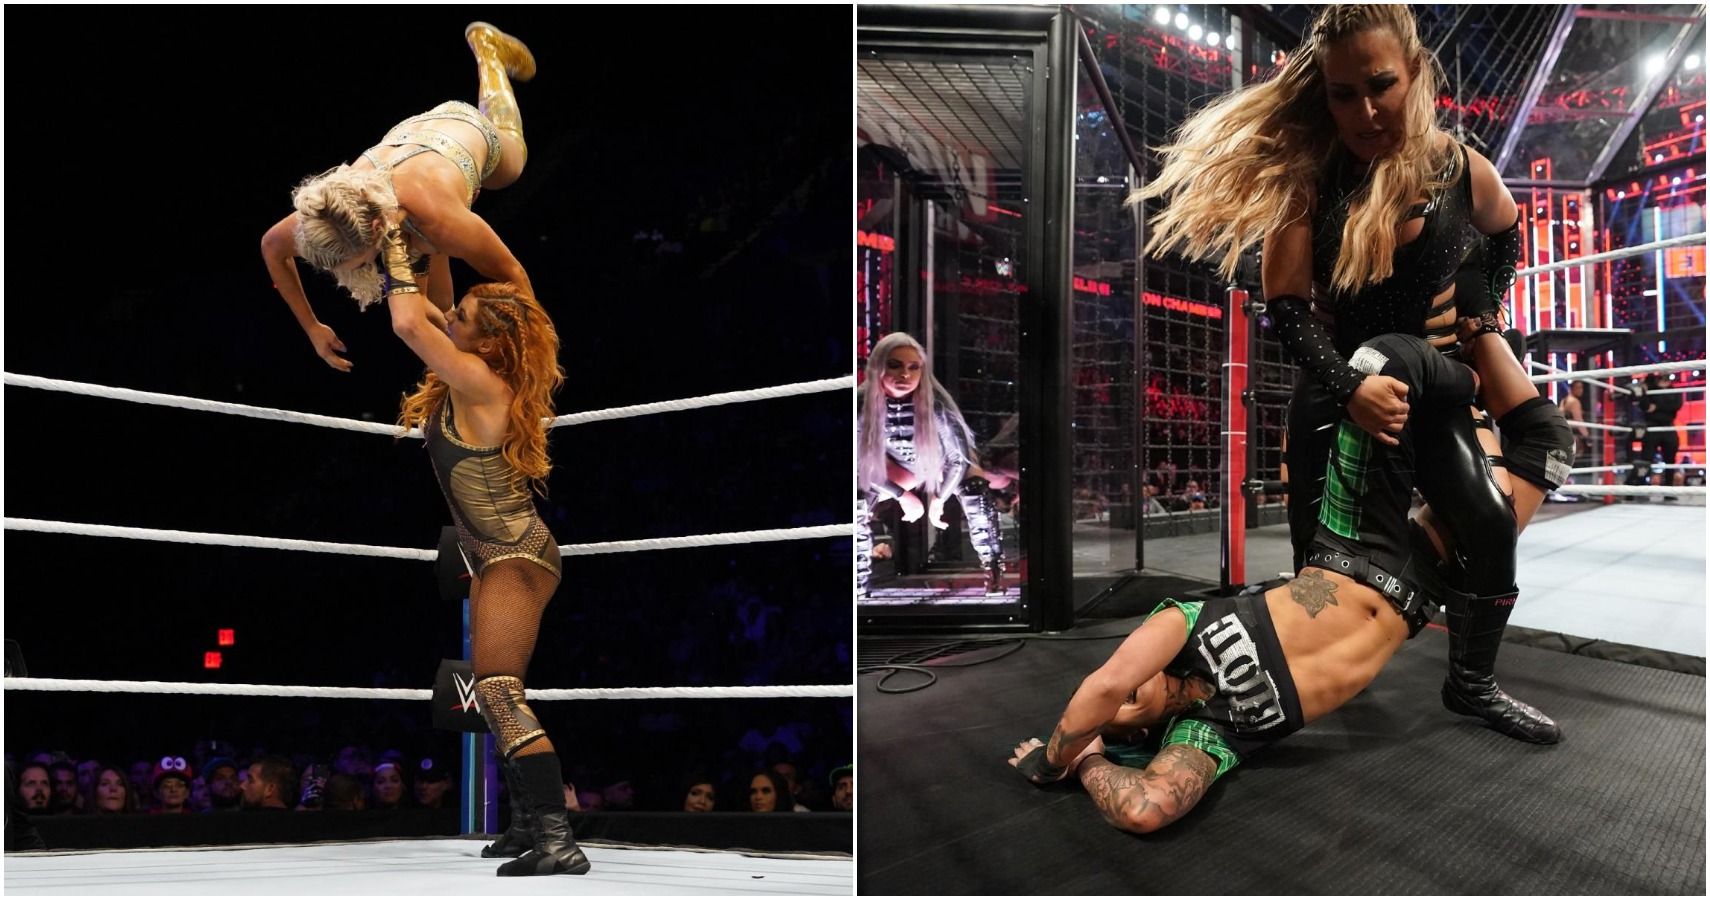 Women's Cage Match Set for WWE RAW 30 - Wrestling Attitude